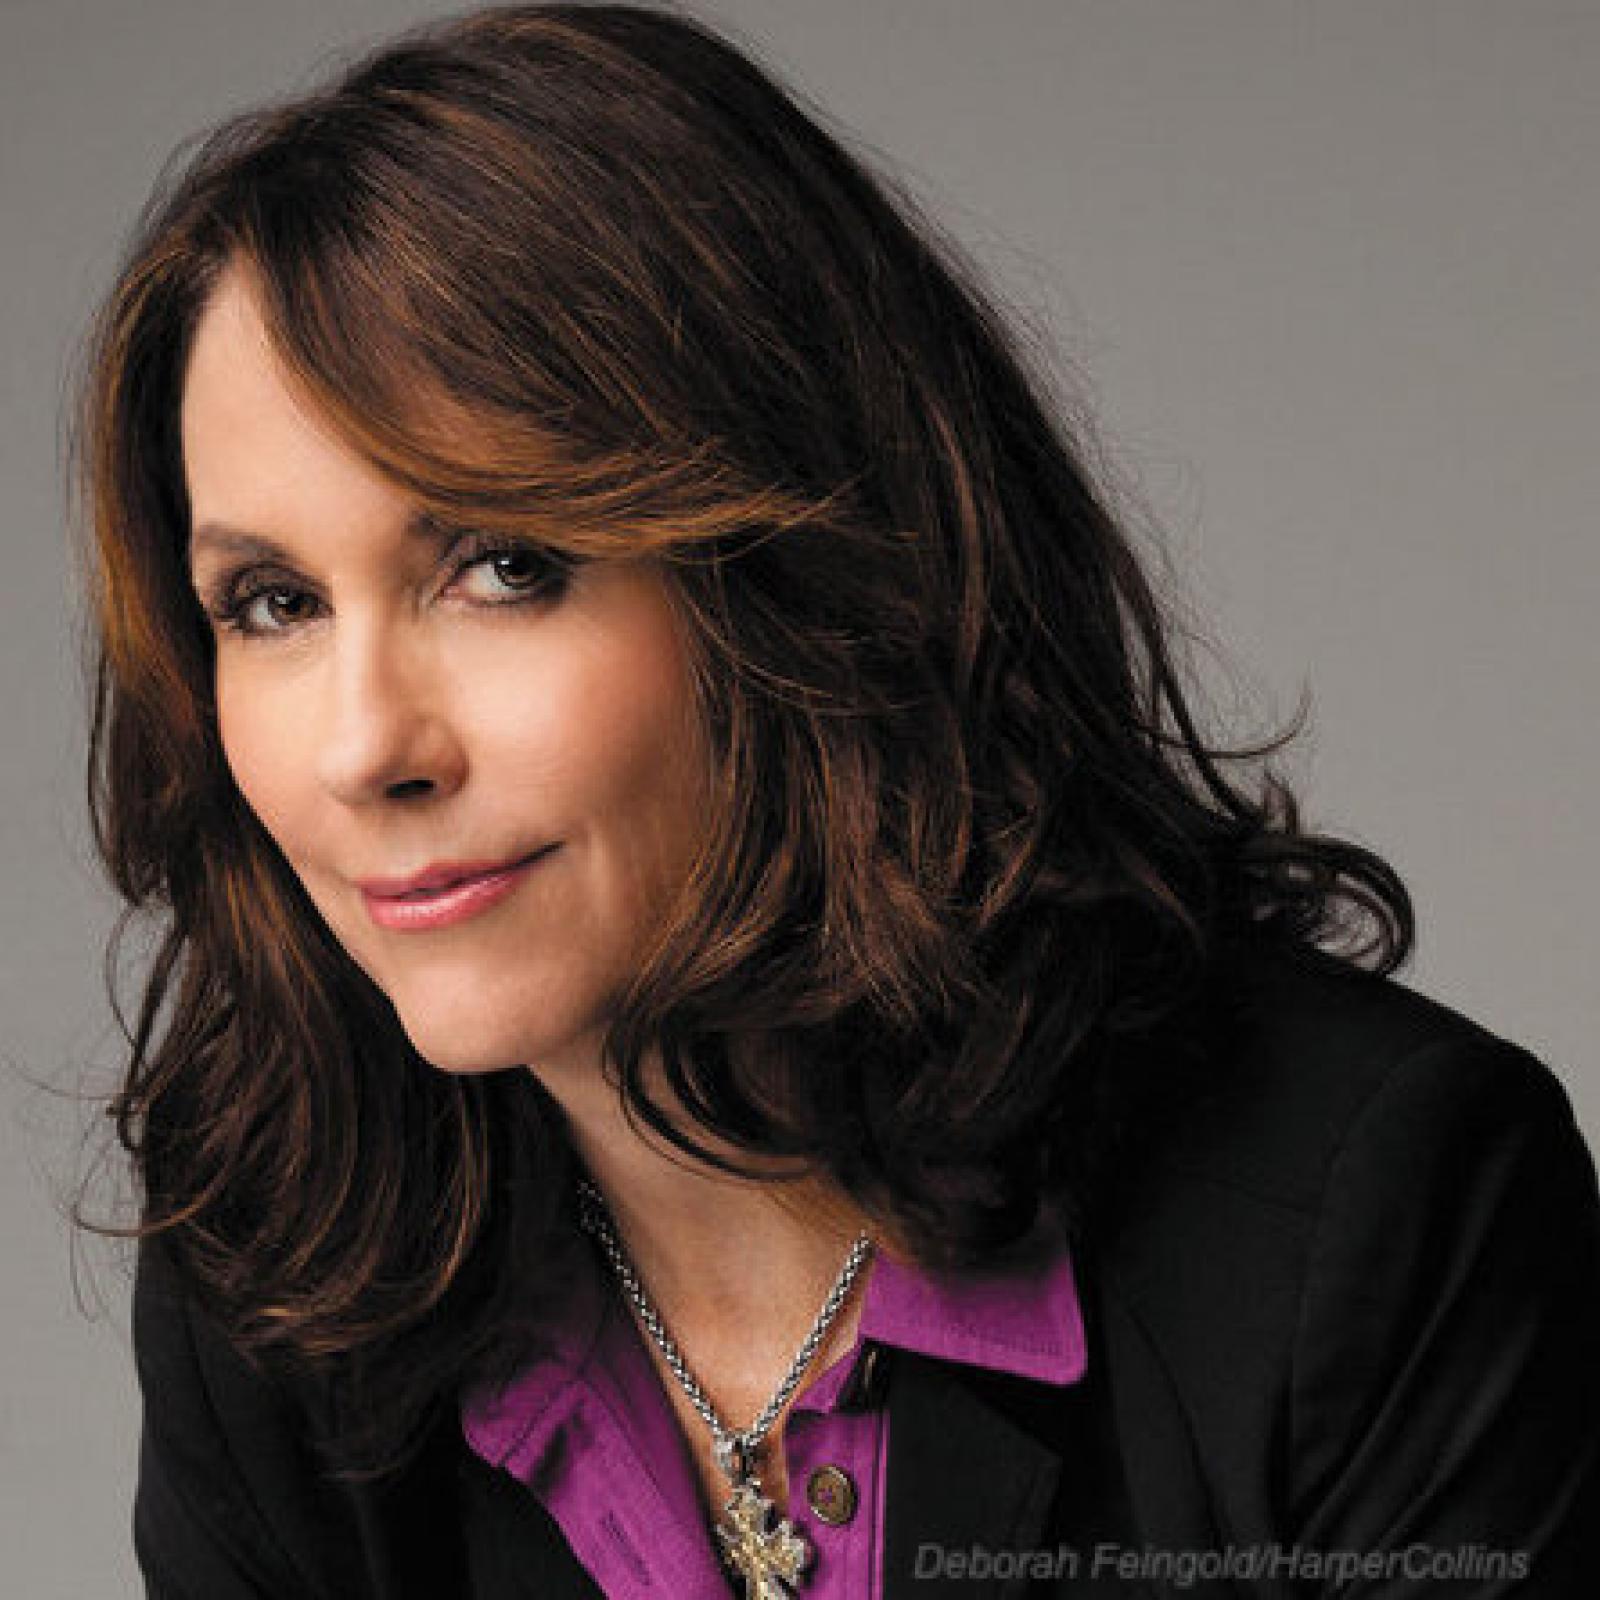 Mary Karr, Remembering The Years She Spent 'Lit' | Fresh ...